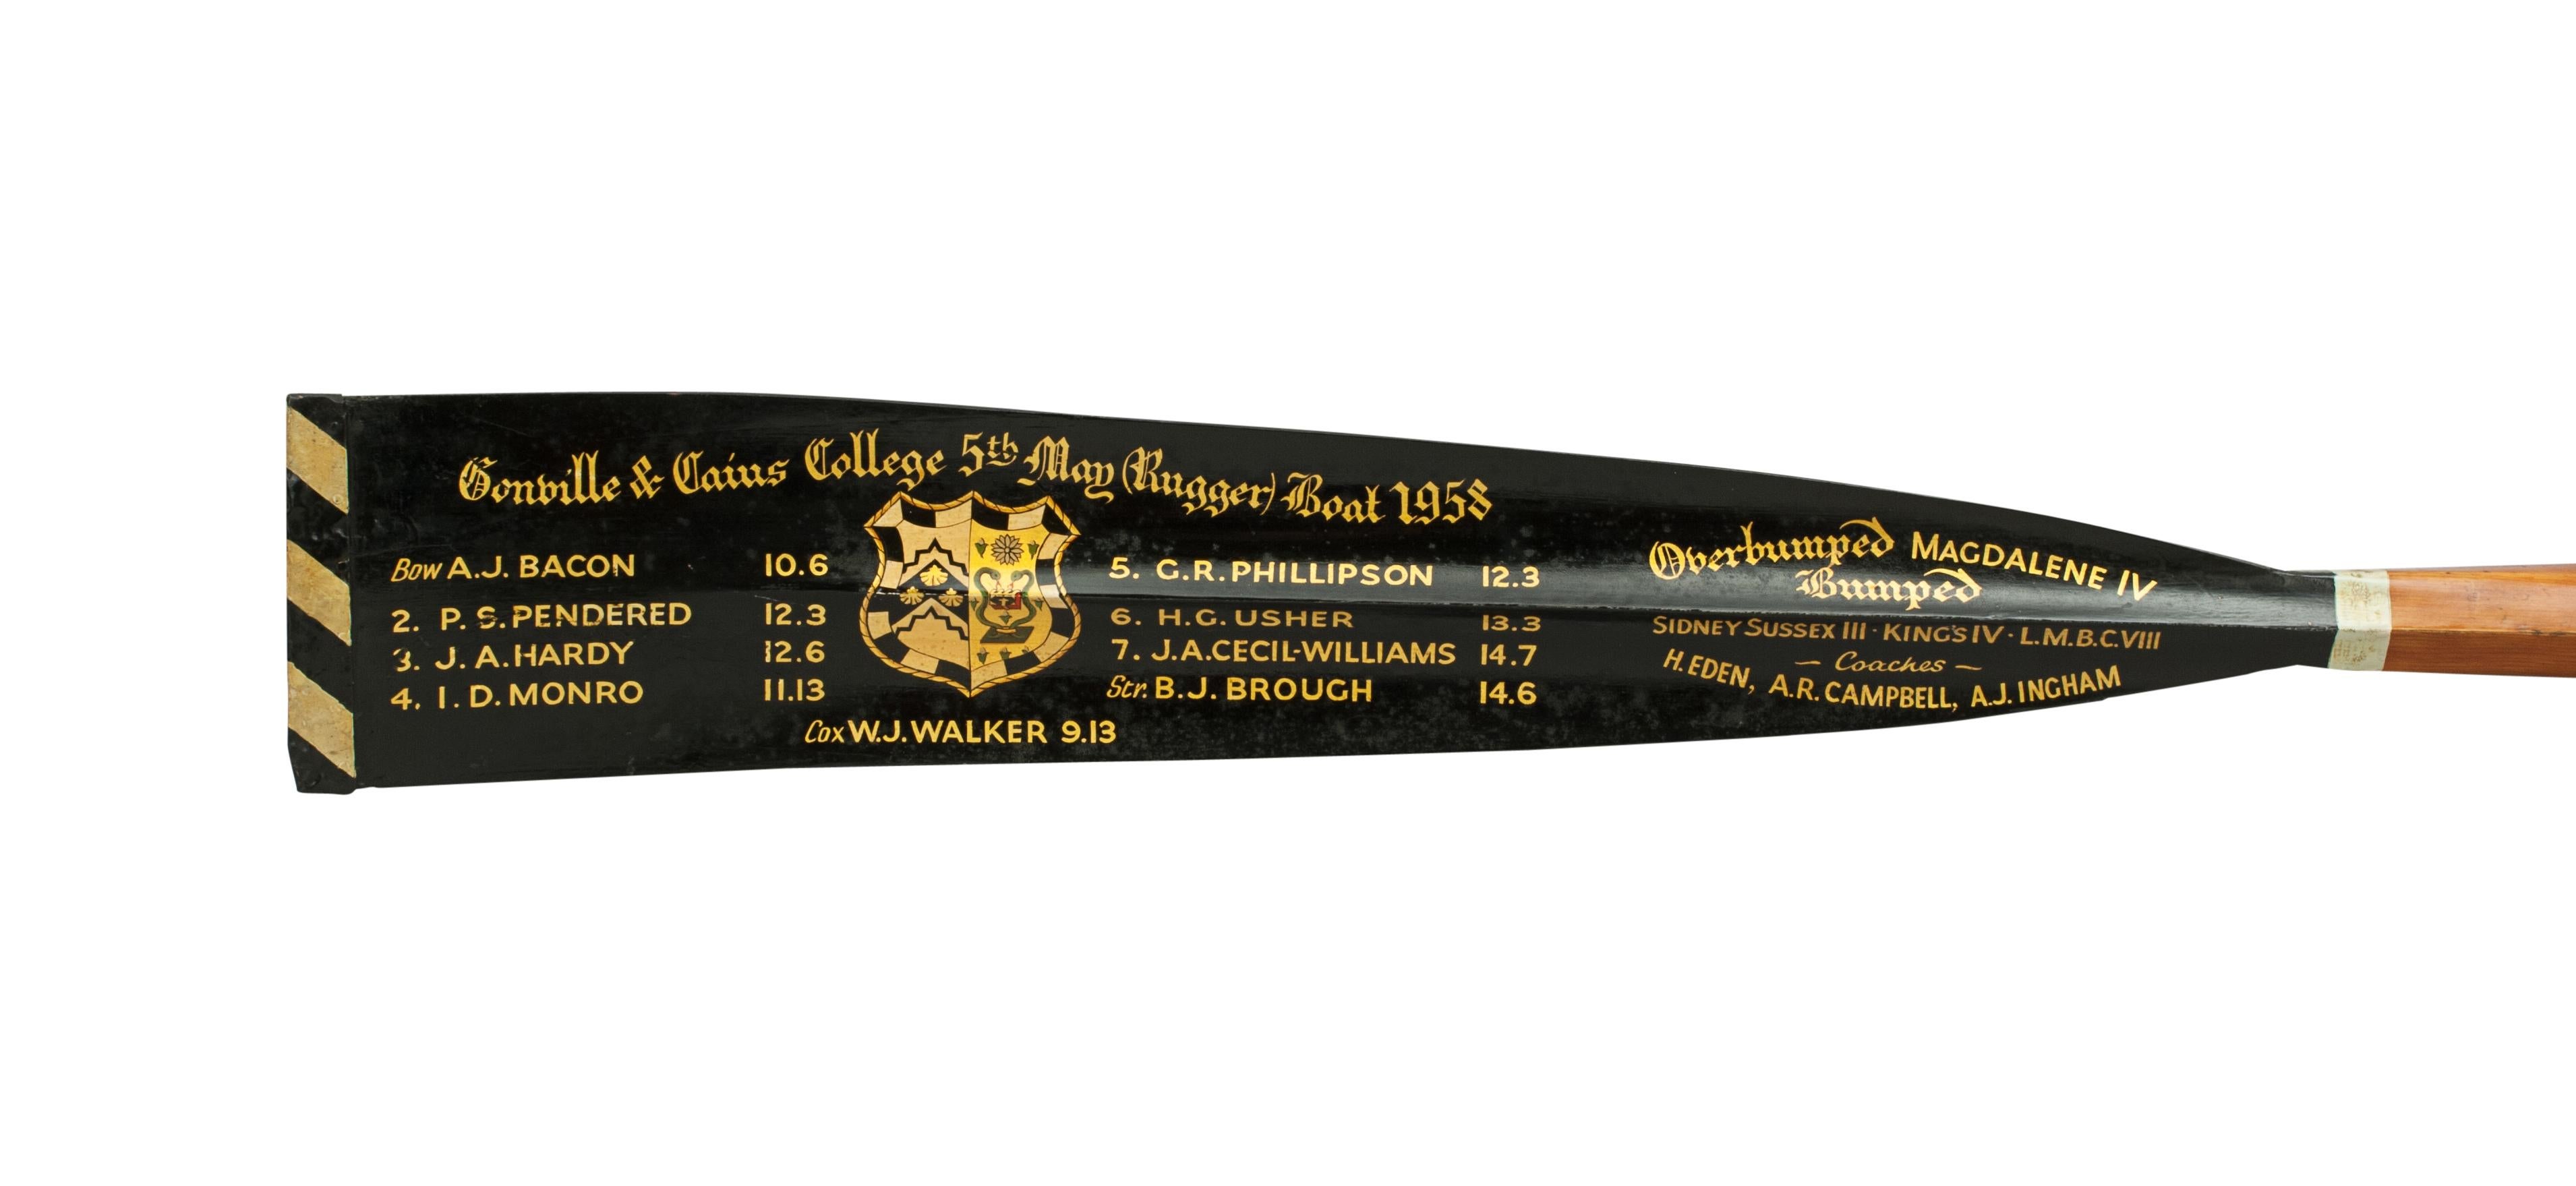 Rowing Oar Blade, Gonville & Caius College, 5th May (Rugger) Boat 1958.
The full length 12' oar is a traditional Gonville & Caius College (Cambridge University) presentation rowing oar with calligraphy and college insignia. The writing on the